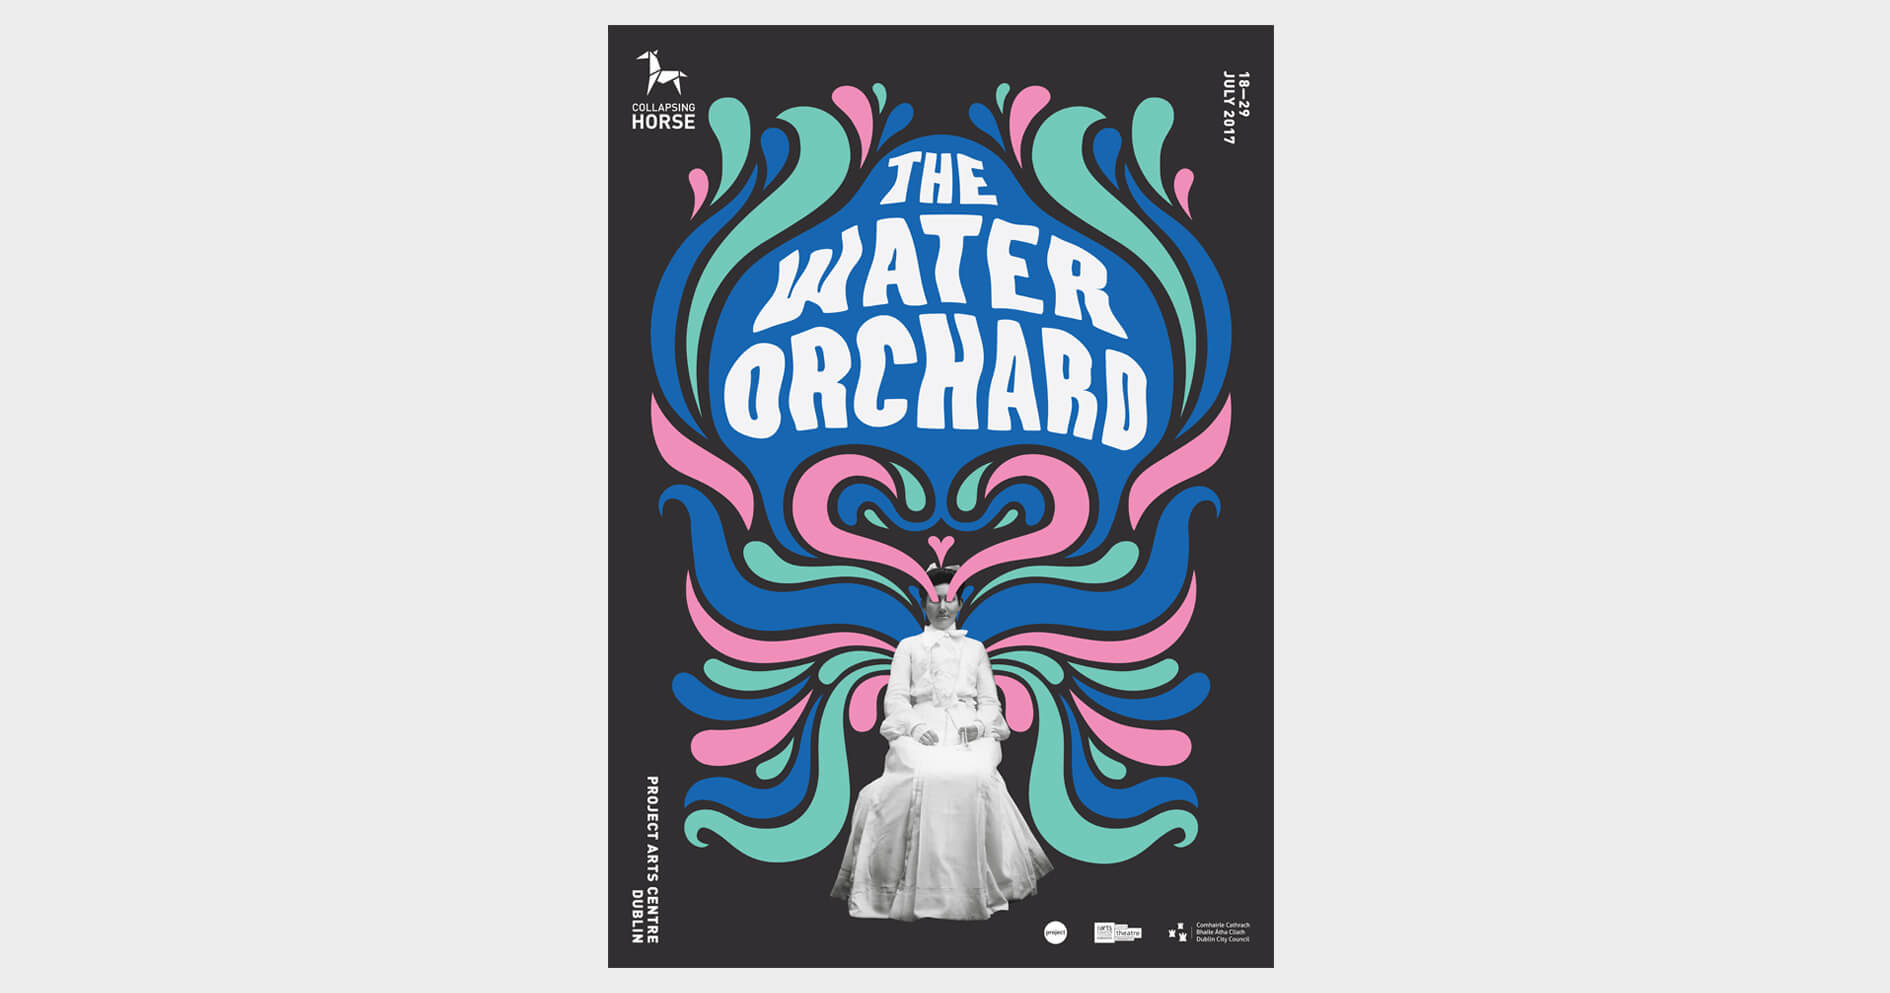 Collapsing Horse / The Water Orchard – Poster